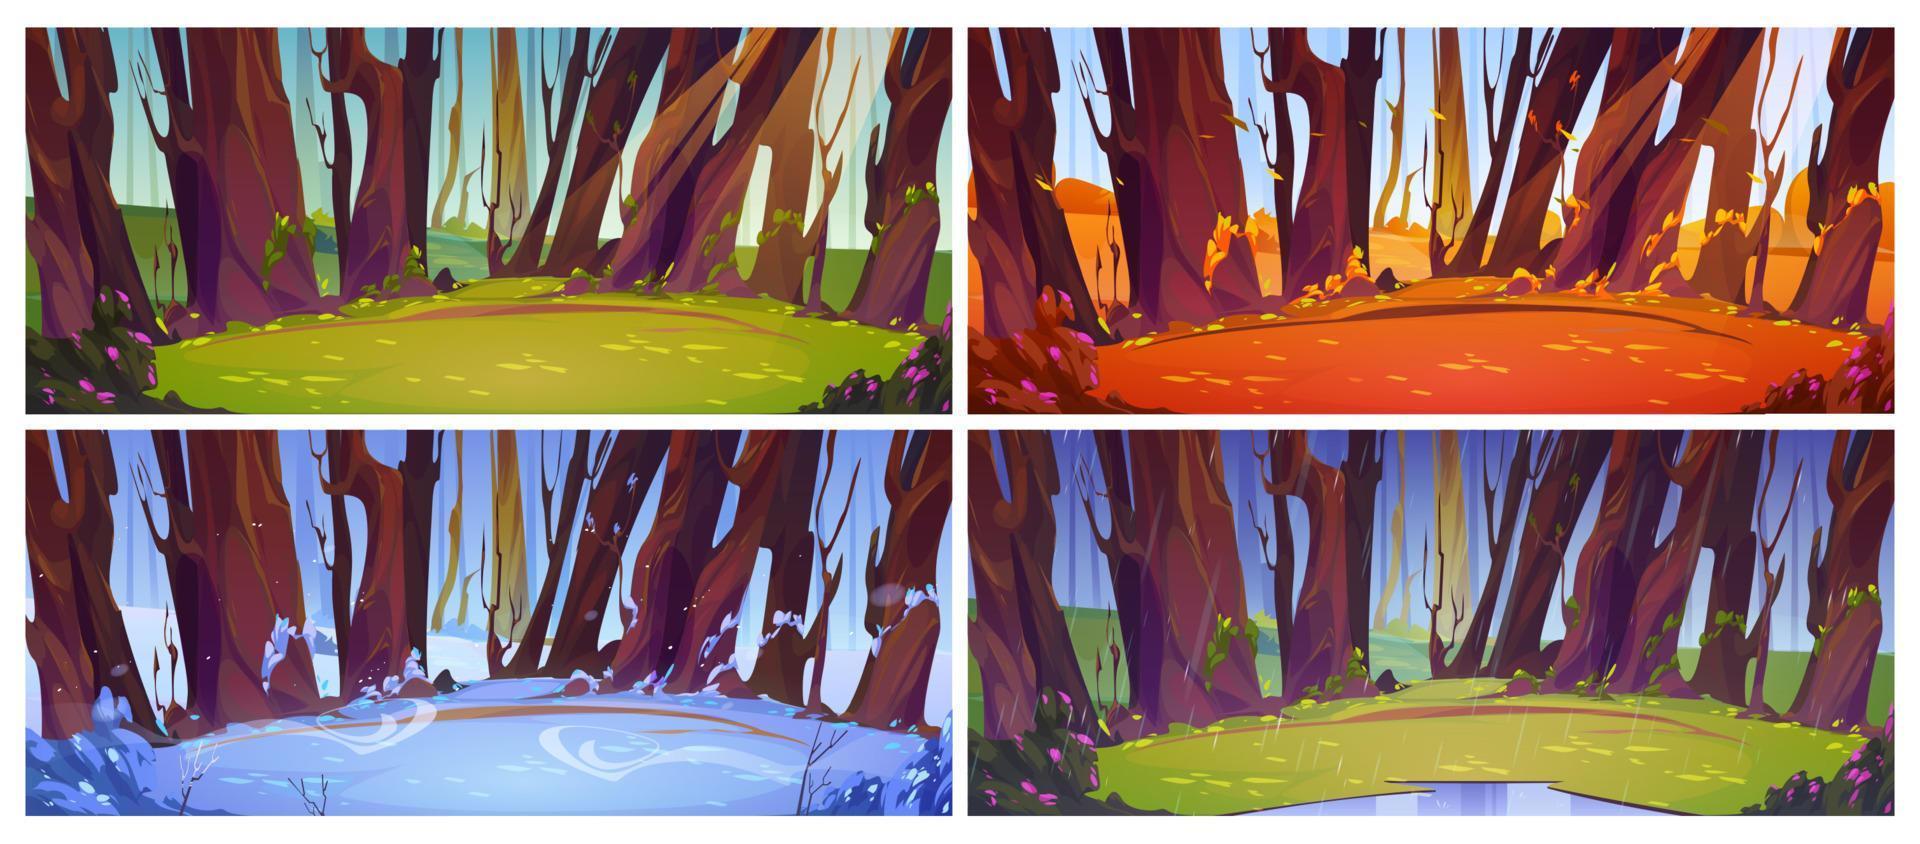 Four season vector illustration of forest glade